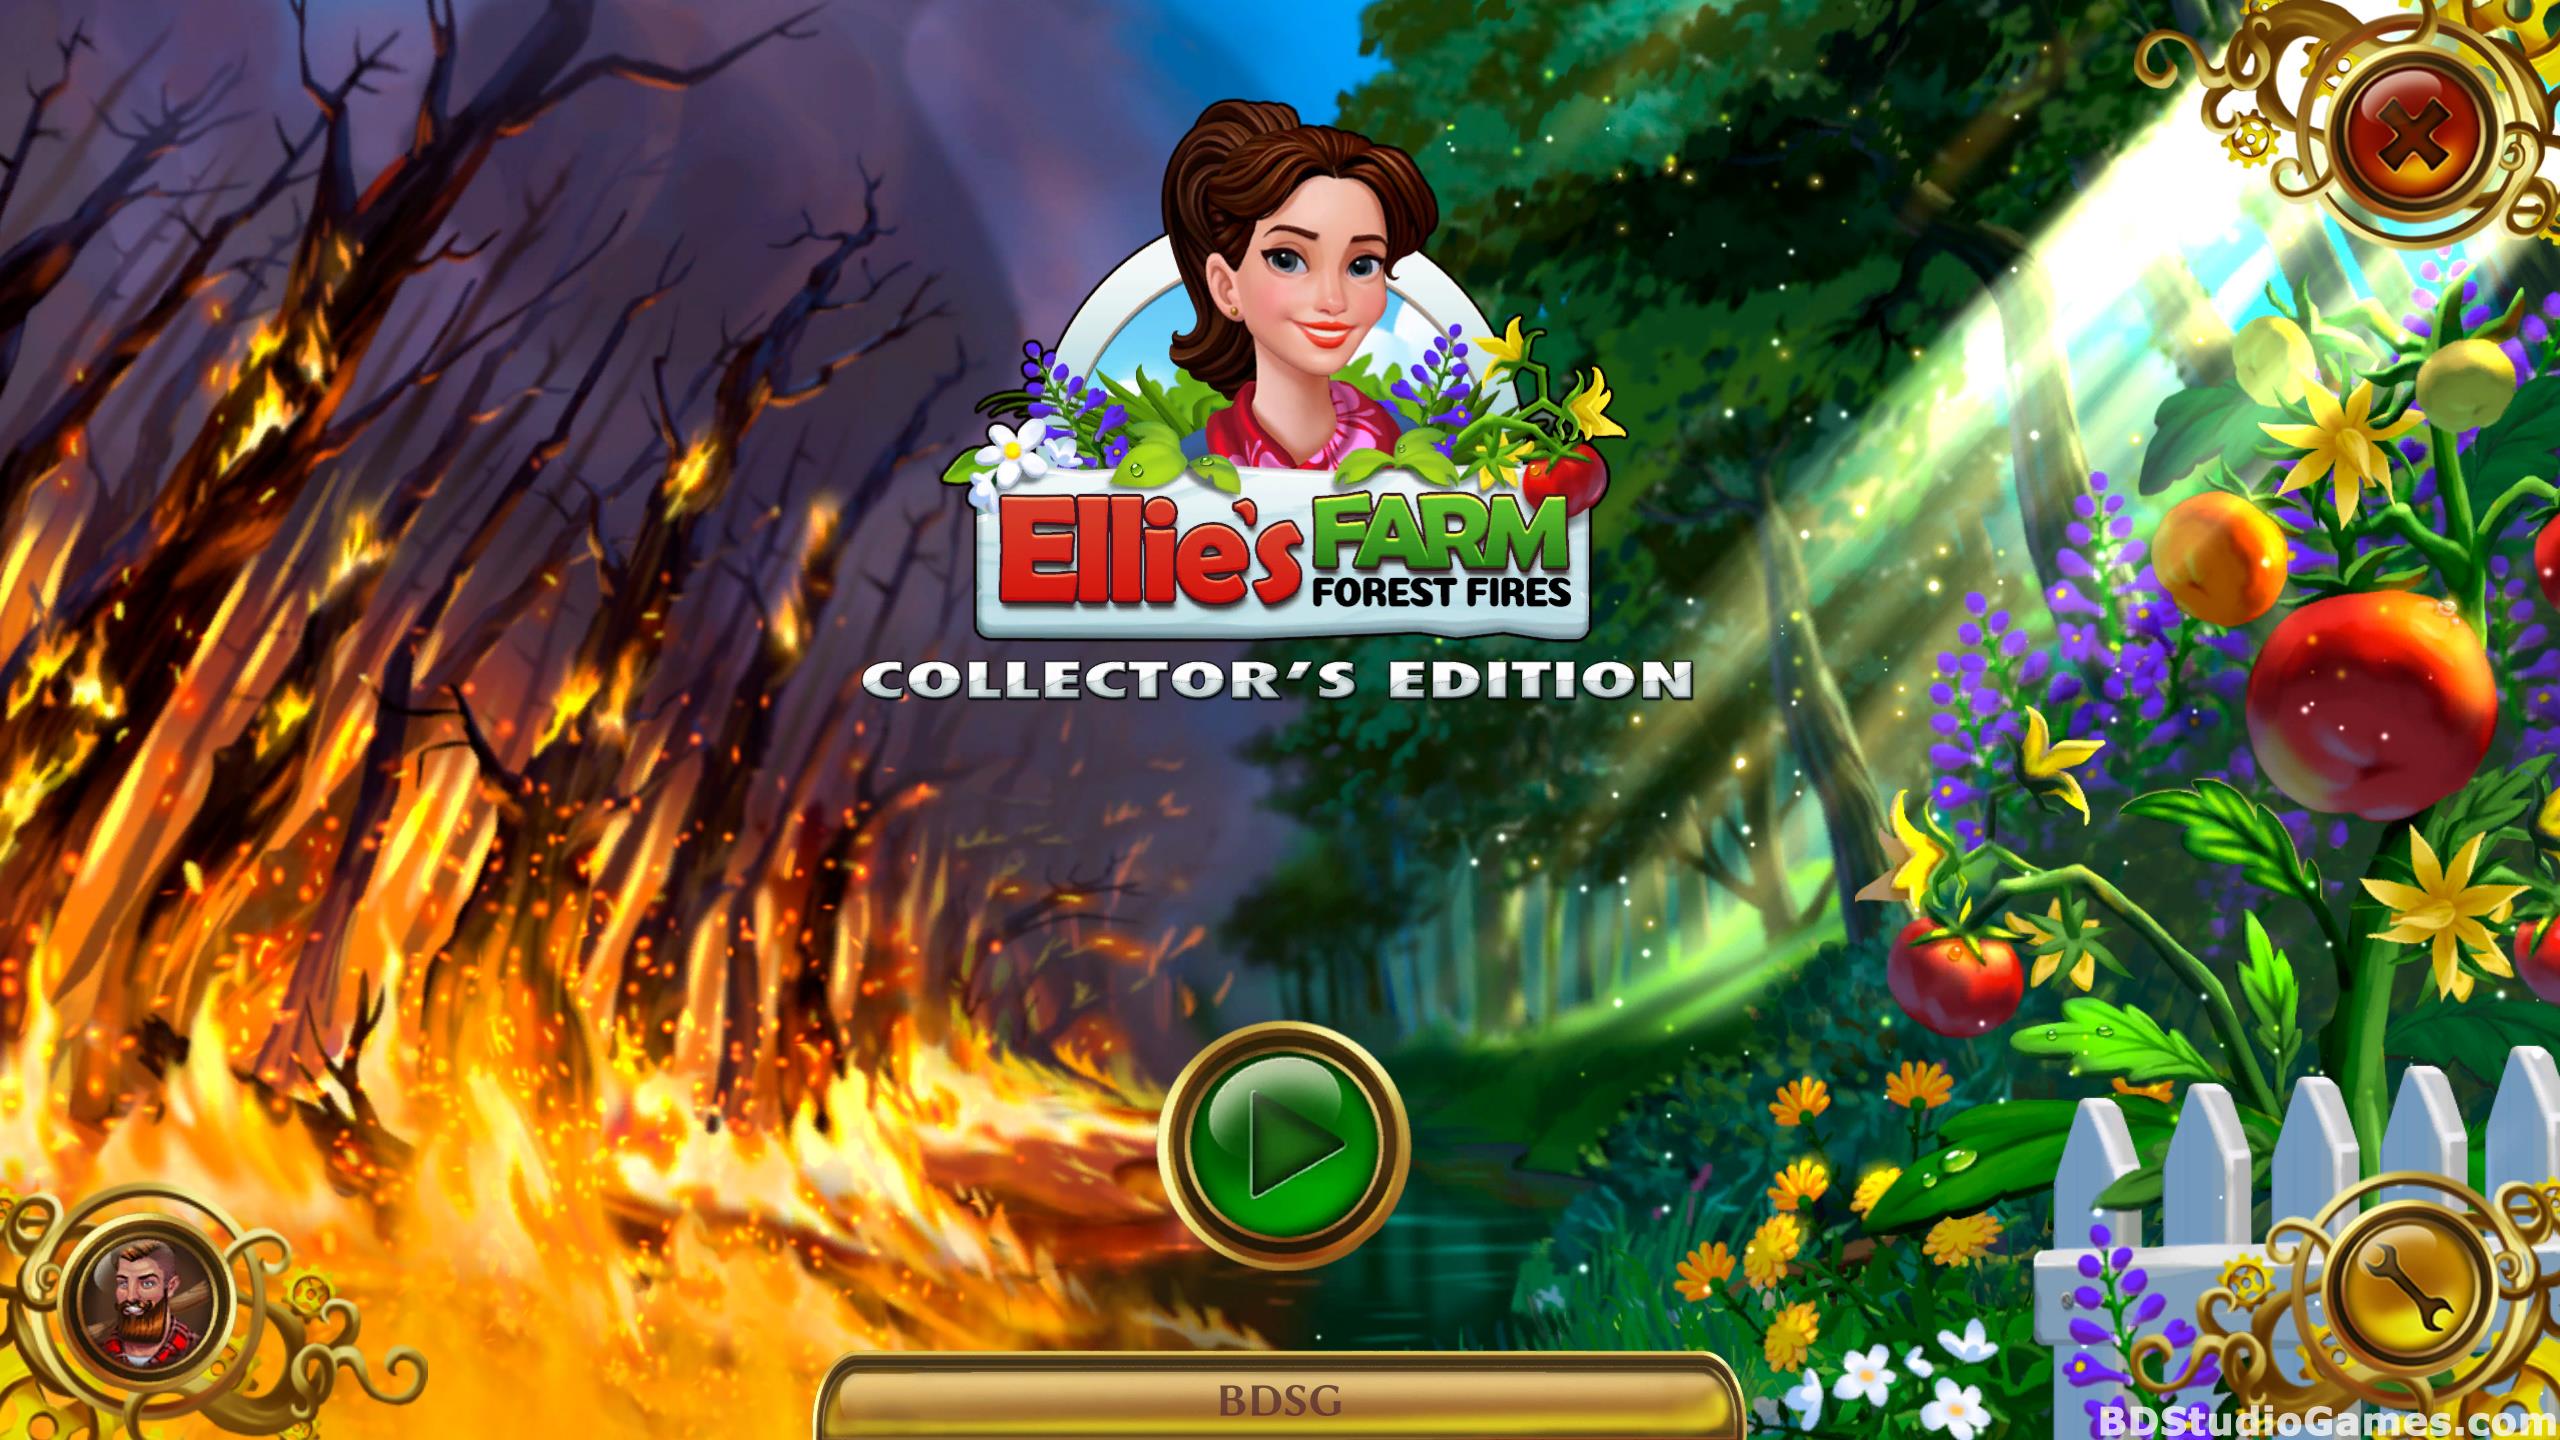 Ellie's Farm: Forest Fires Collector's Edition Free Download Screenshots 01